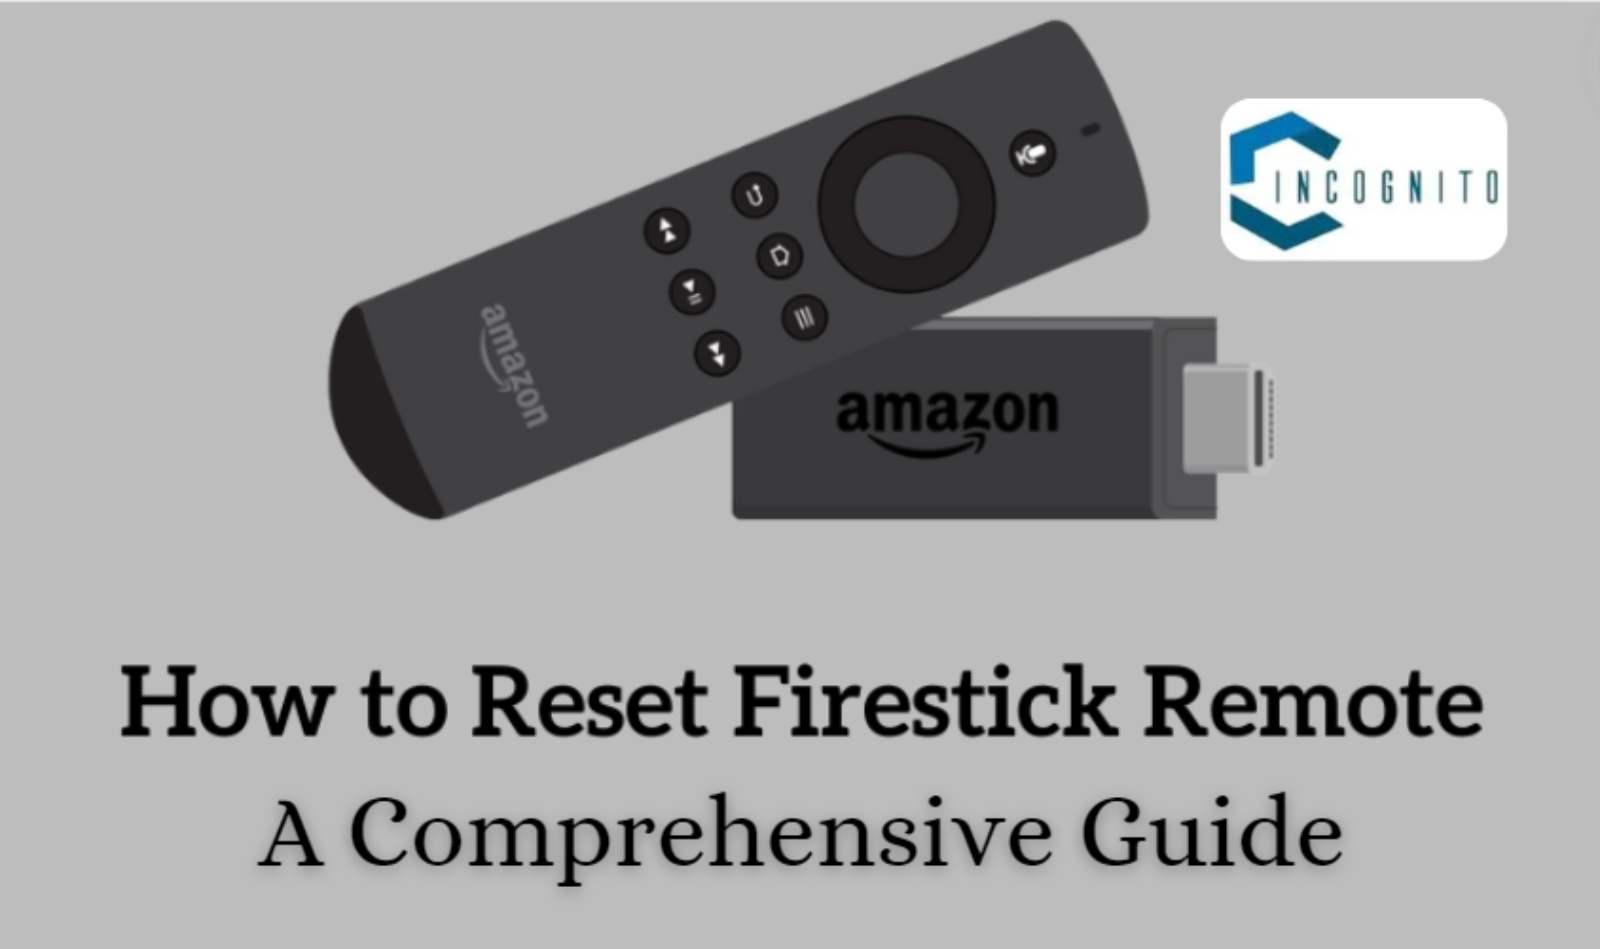 How to Reset Firestick Remote: A Comprehensive Guide